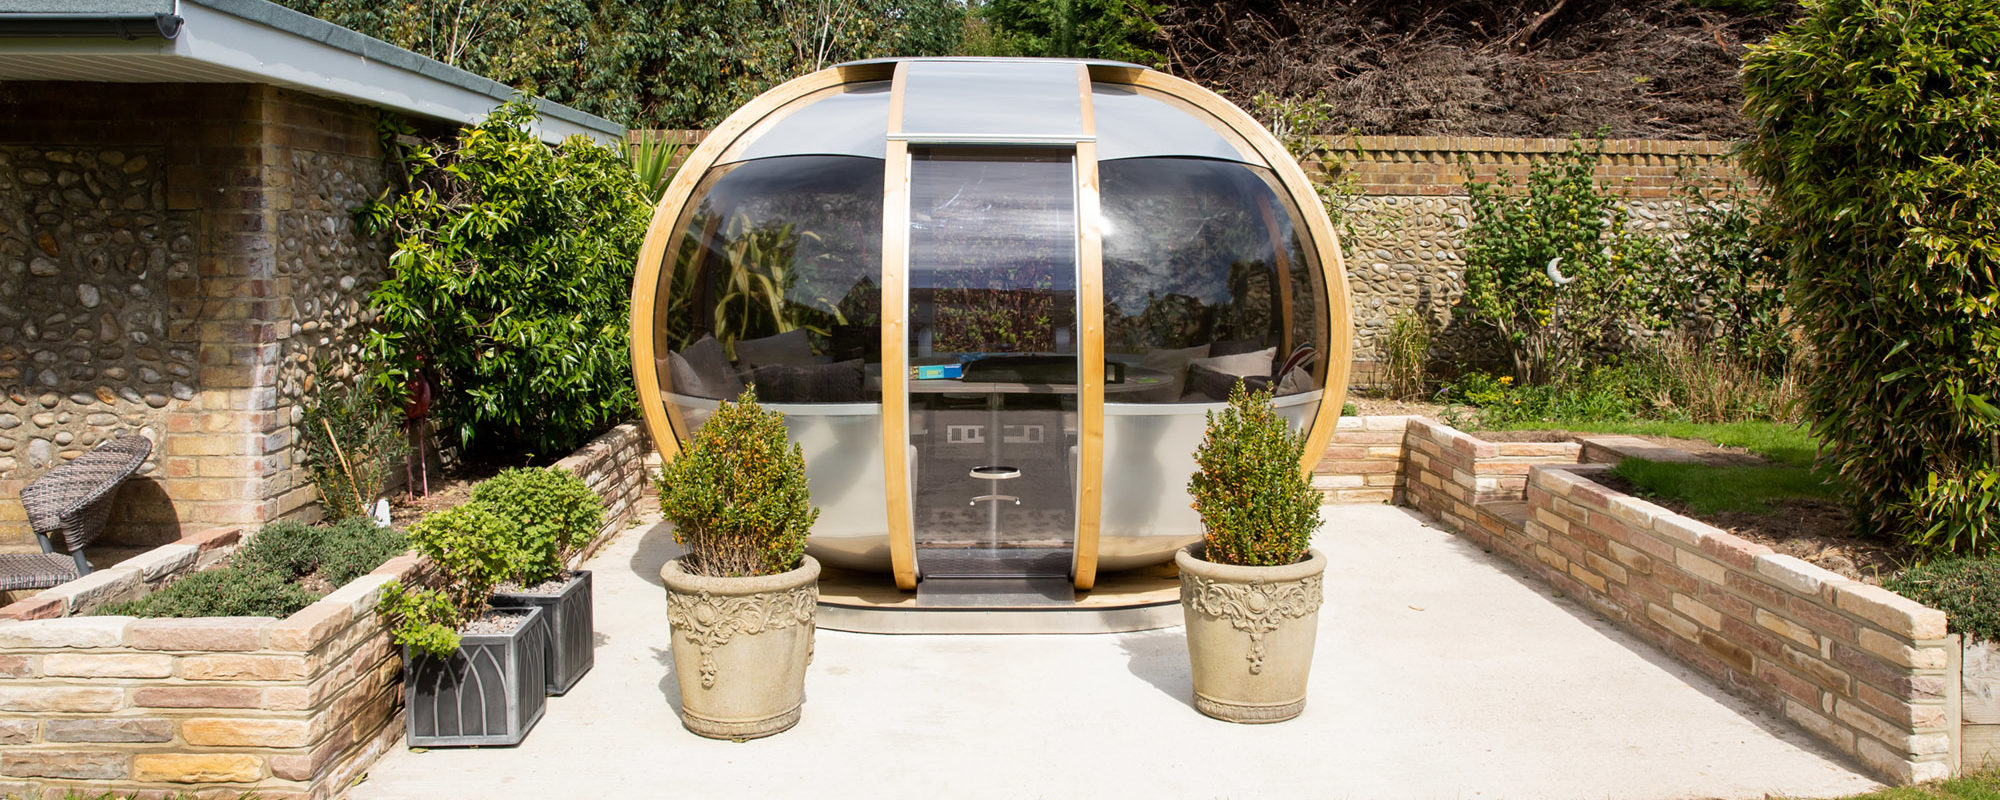 How cool is this garden pod? Sandstone walls retaining the soil that we dug down into